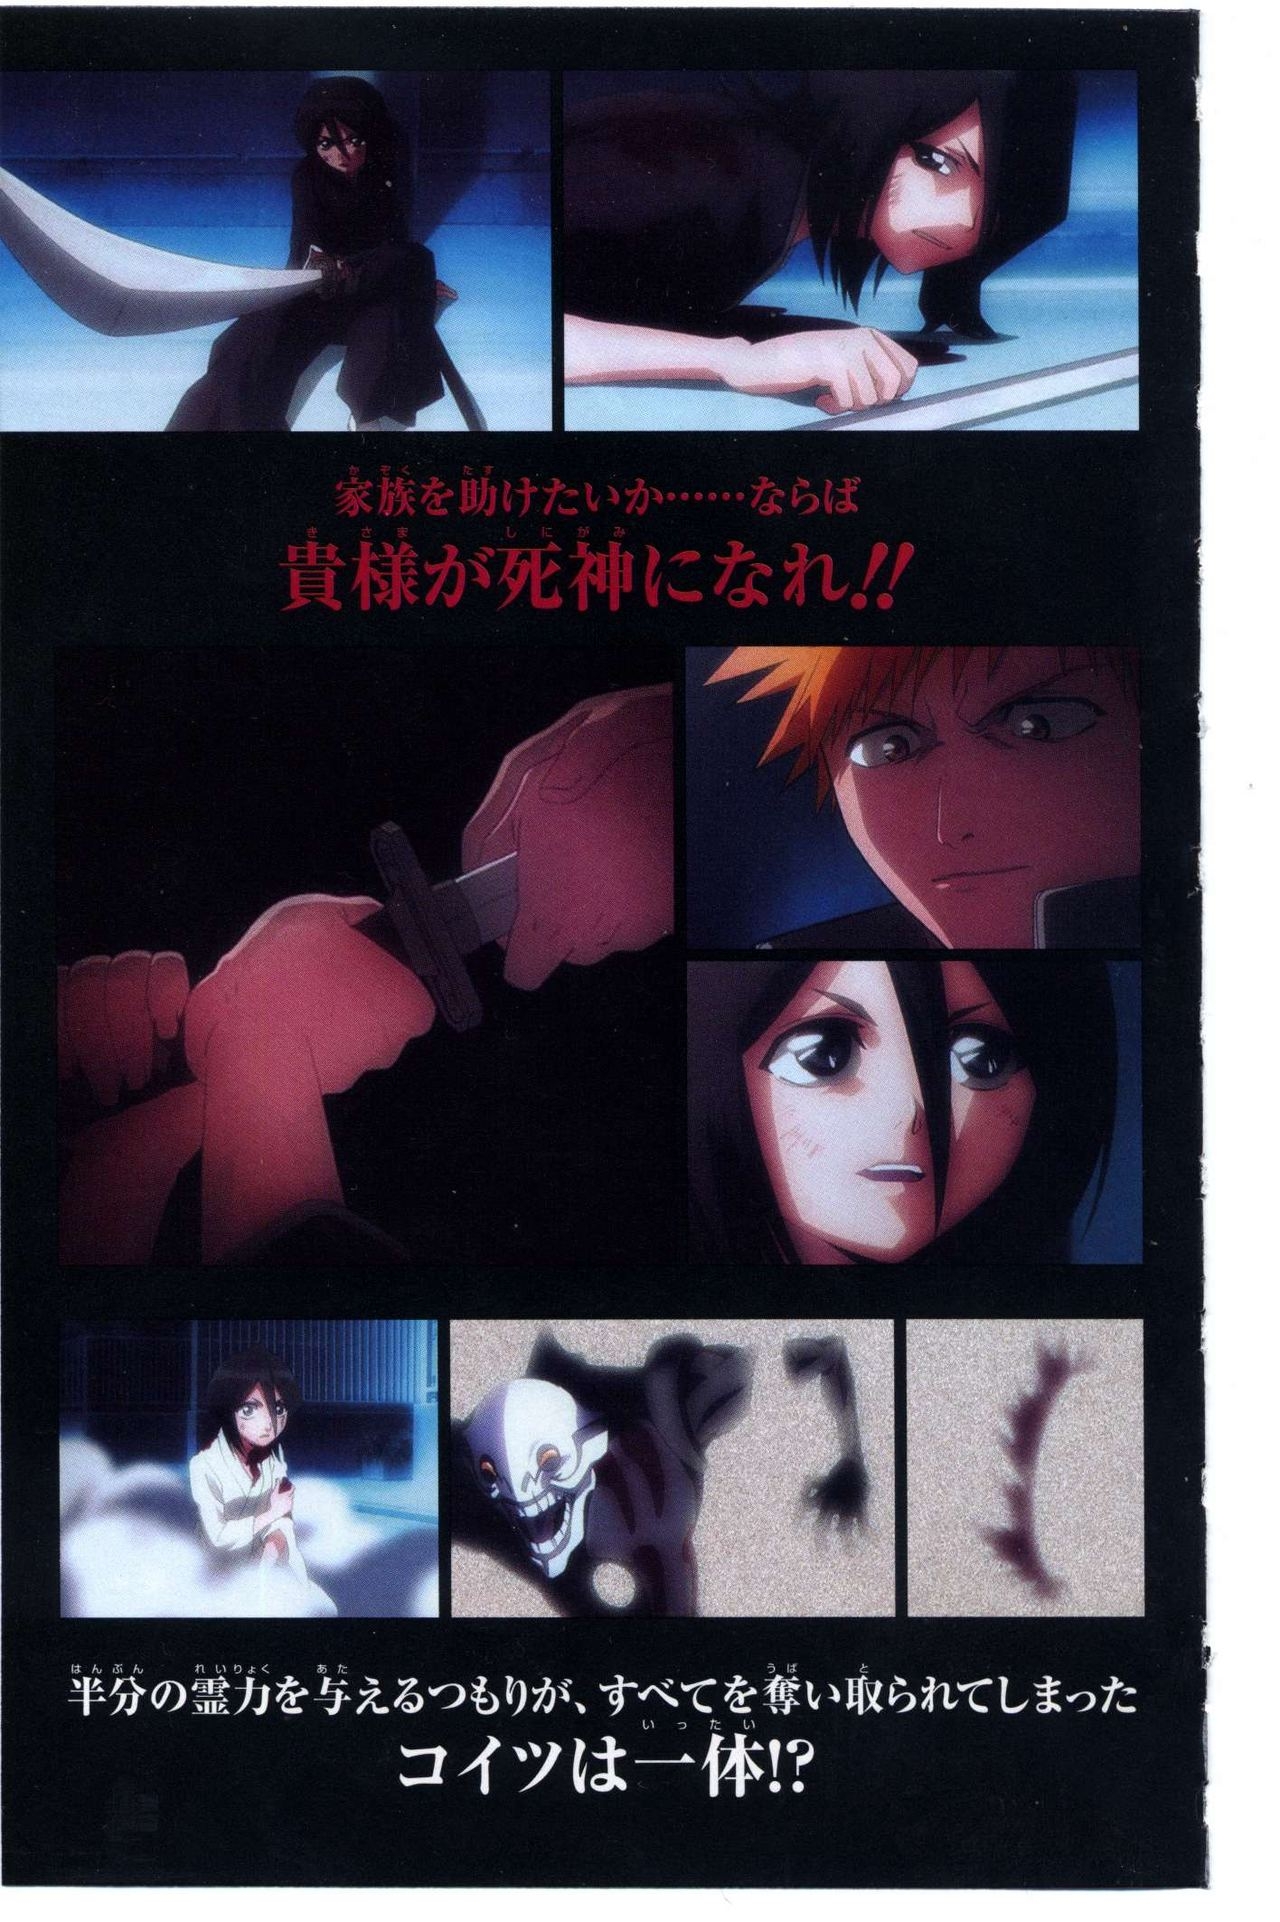 Bleach: Official Animation Book VIBEs 13